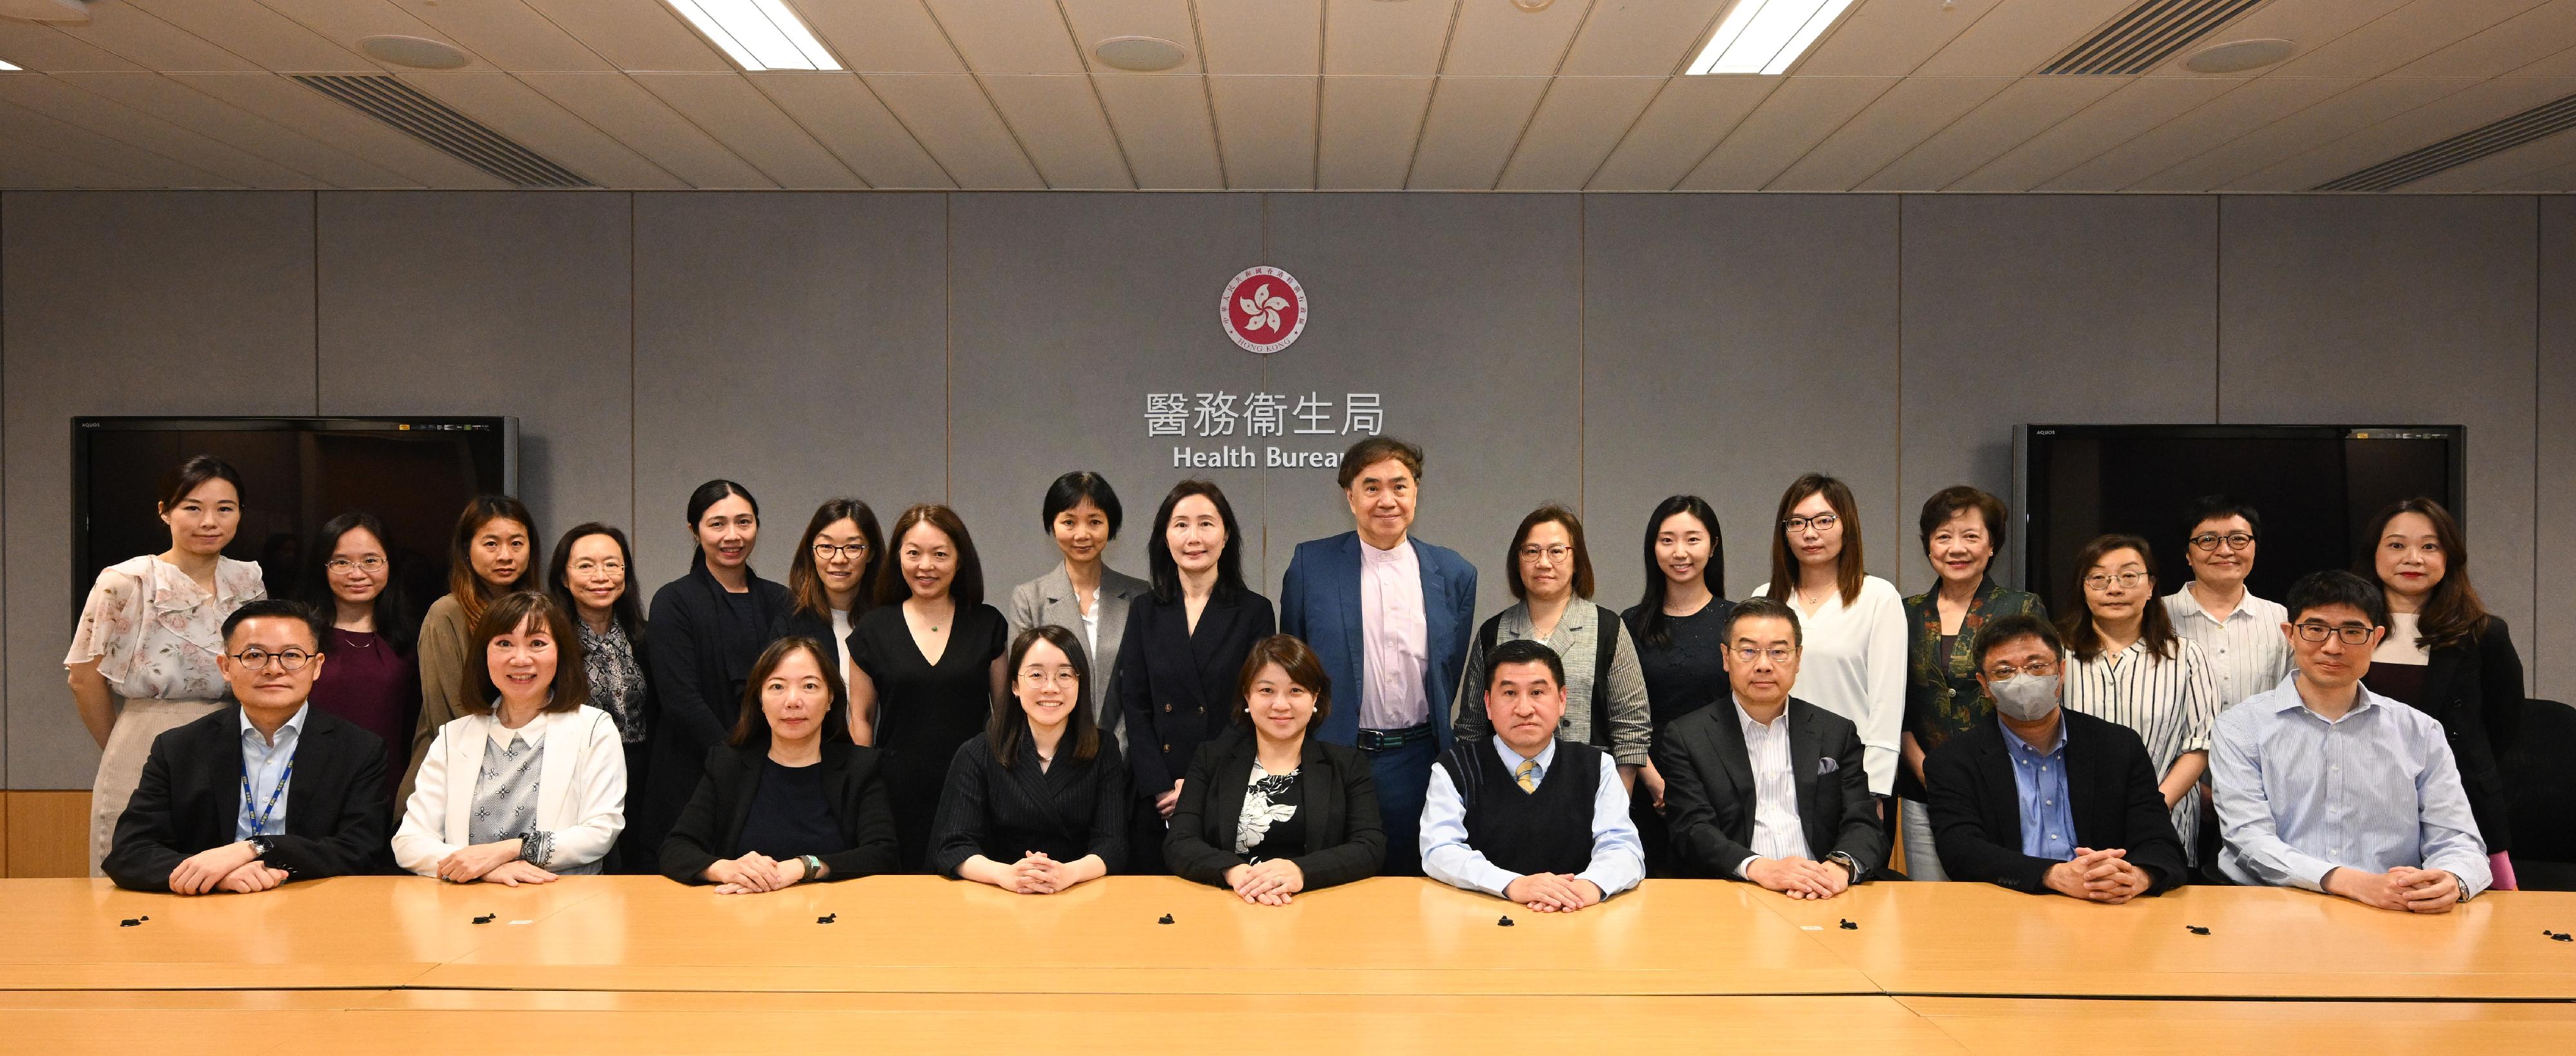 The ninth meeting of the Committee on Promotion of Breastfeeding was held today (April 9). The Under Secretary for Health, Dr Libby Lee, (front row, centre) was pictured in a group photo with other committee members after the meeting.